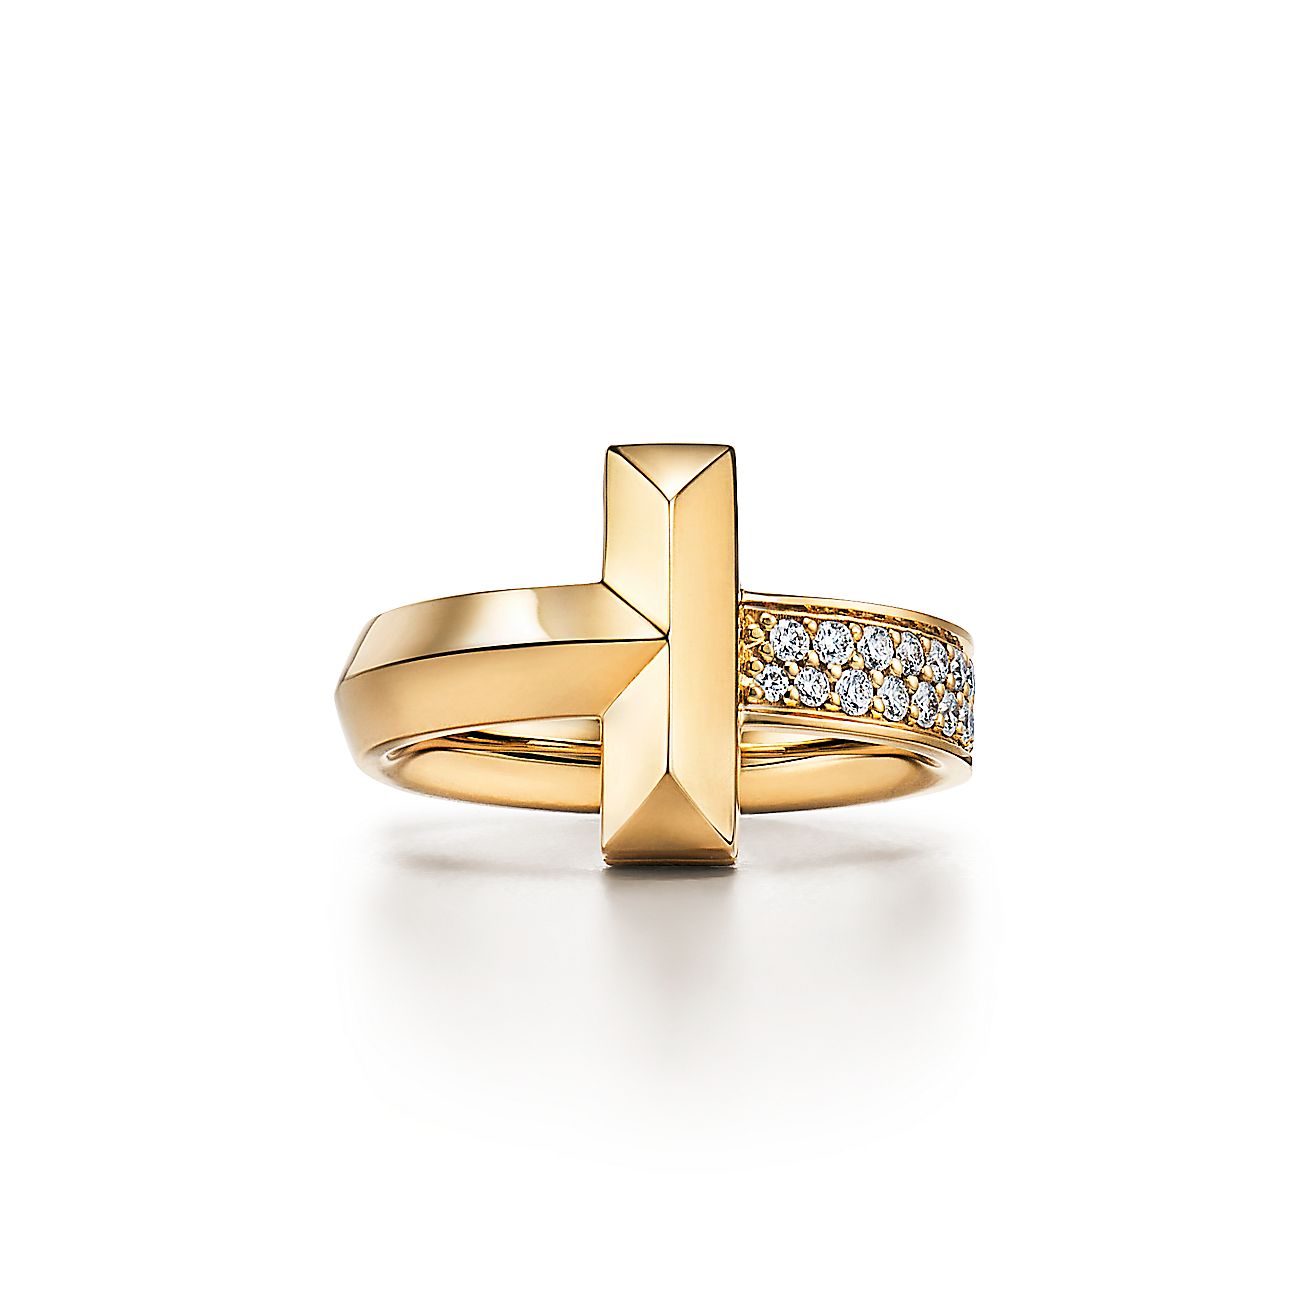 Tiffany T T1 Ring in Yellow Gold with Diamonds, 4.5 mm Wide